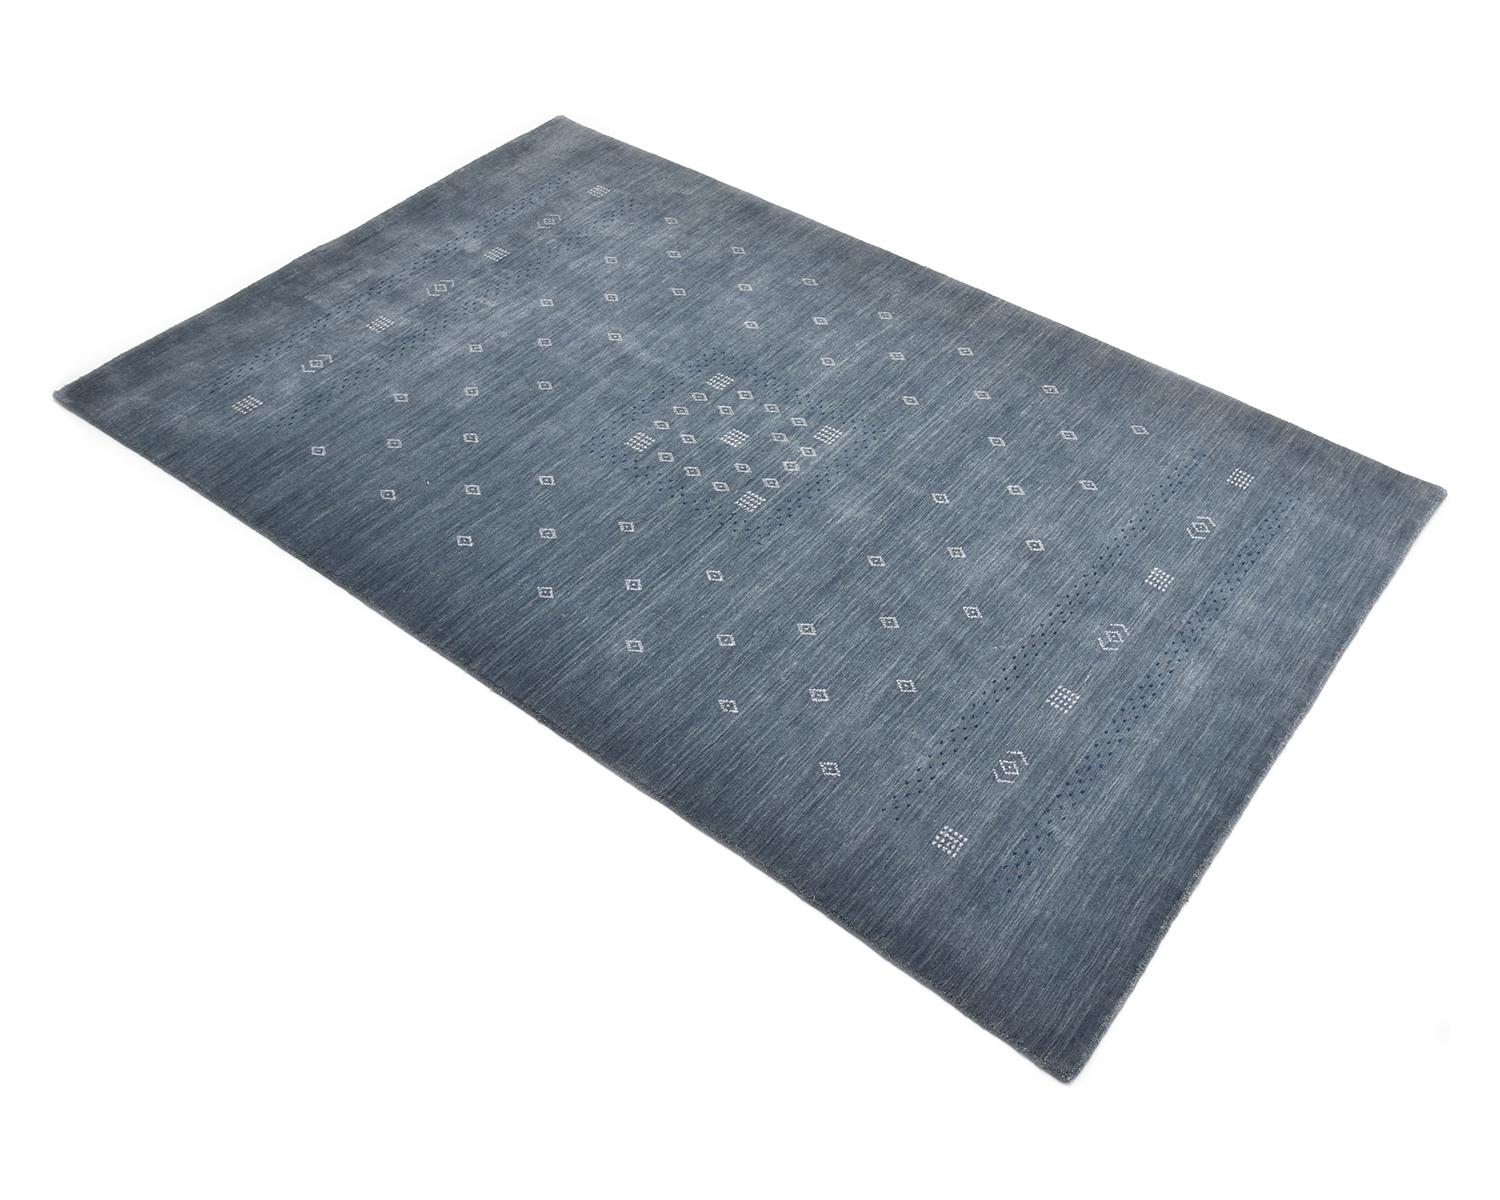 Solo Rugs Gabbeh Tribal Hand Loomed Gray Area Rug 1